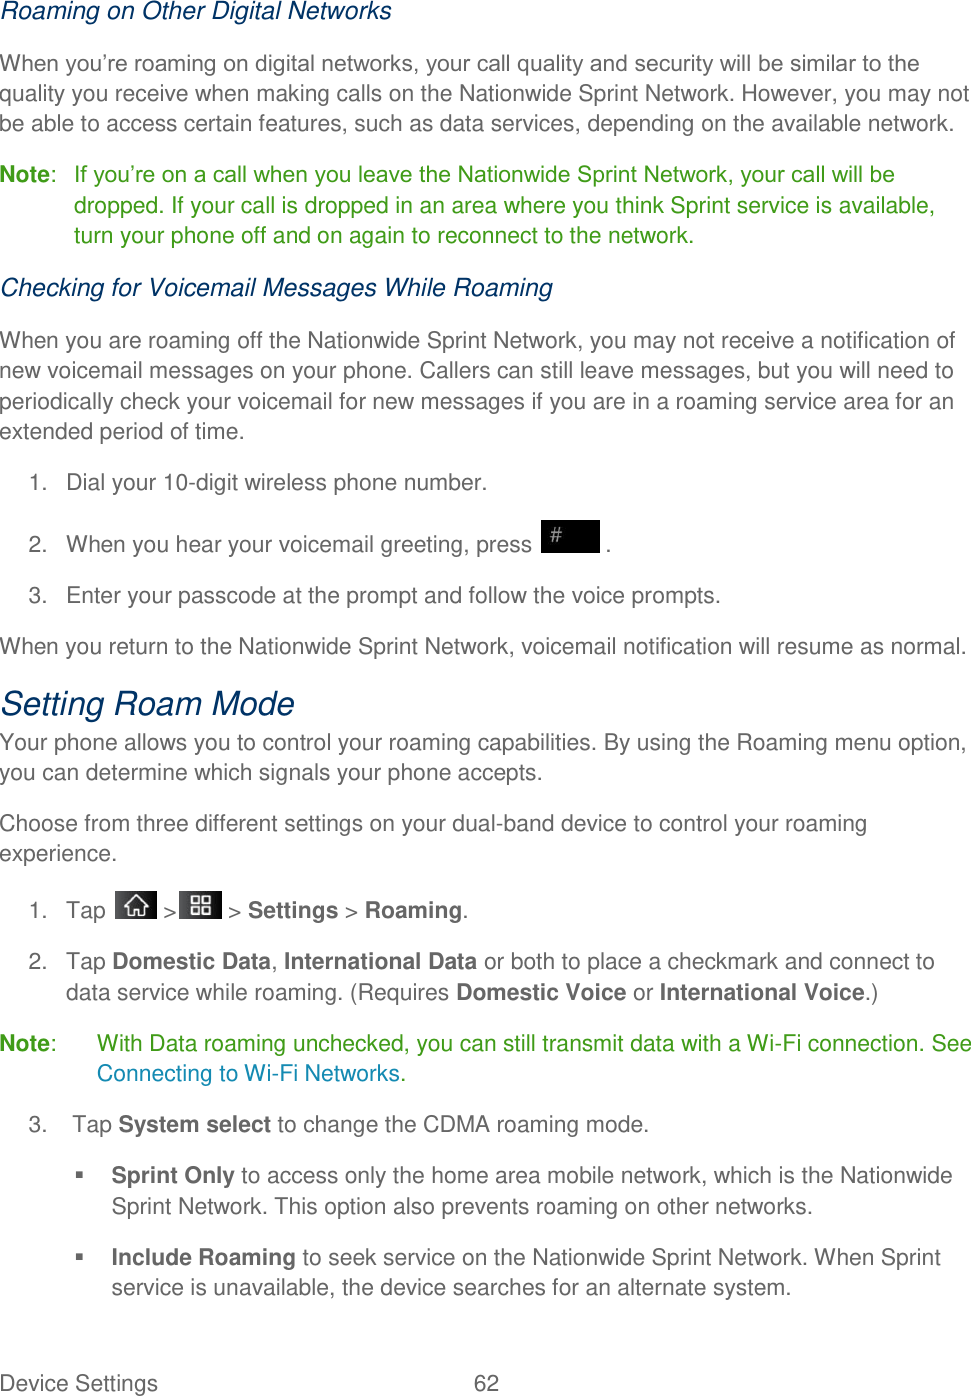 Device Settings  62 Roaming on Other Digital Networks When you‘re roaming on digital networks, your call quality and security will be similar to the quality you receive when making calls on the Nationwide Sprint Network. However, you may not be able to access certain features, such as data services, depending on the available network. Note:  If you‘re on a call when you leave the Nationwide Sprint Network, your call will be dropped. If your call is dropped in an area where you think Sprint service is available, turn your phone off and on again to reconnect to the network. Checking for Voicemail Messages While Roaming When you are roaming off the Nationwide Sprint Network, you may not receive a notification of new voicemail messages on your phone. Callers can still leave messages, but you will need to periodically check your voicemail for new messages if you are in a roaming service area for an extended period of time. 1.  Dial your 10-digit wireless phone number. 2.  When you hear your voicemail greeting, press   . 3.  Enter your passcode at the prompt and follow the voice prompts. When you return to the Nationwide Sprint Network, voicemail notification will resume as normal. Setting Roam Mode Your phone allows you to control your roaming capabilities. By using the Roaming menu option, you can determine which signals your phone accepts. Choose from three different settings on your dual-band device to control your roaming experience. 1.  Tap   &gt;  &gt; Settings &gt; Roaming. 2.  Tap Domestic Data, International Data or both to place a checkmark and connect to data service while roaming. (Requires Domestic Voice or International Voice.) Note:  With Data roaming unchecked, you can still transmit data with a Wi-Fi connection. See Connecting to Wi-Fi Networks. 3.   Tap System select to change the CDMA roaming mode.  Sprint Only to access only the home area mobile network, which is the Nationwide Sprint Network. This option also prevents roaming on other networks.  Include Roaming to seek service on the Nationwide Sprint Network. When Sprint service is unavailable, the device searches for an alternate system. 